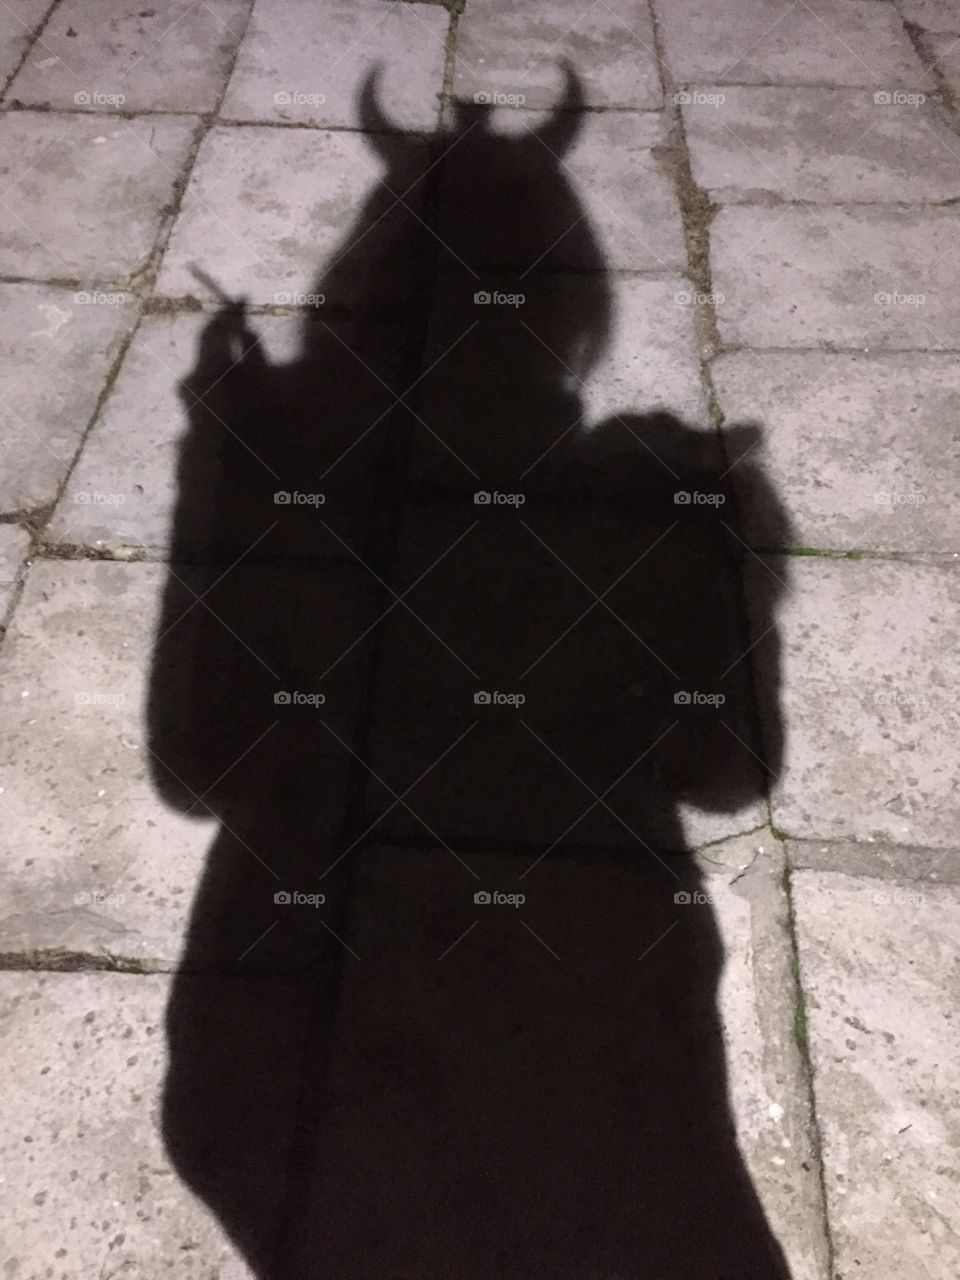 The devil's shadow